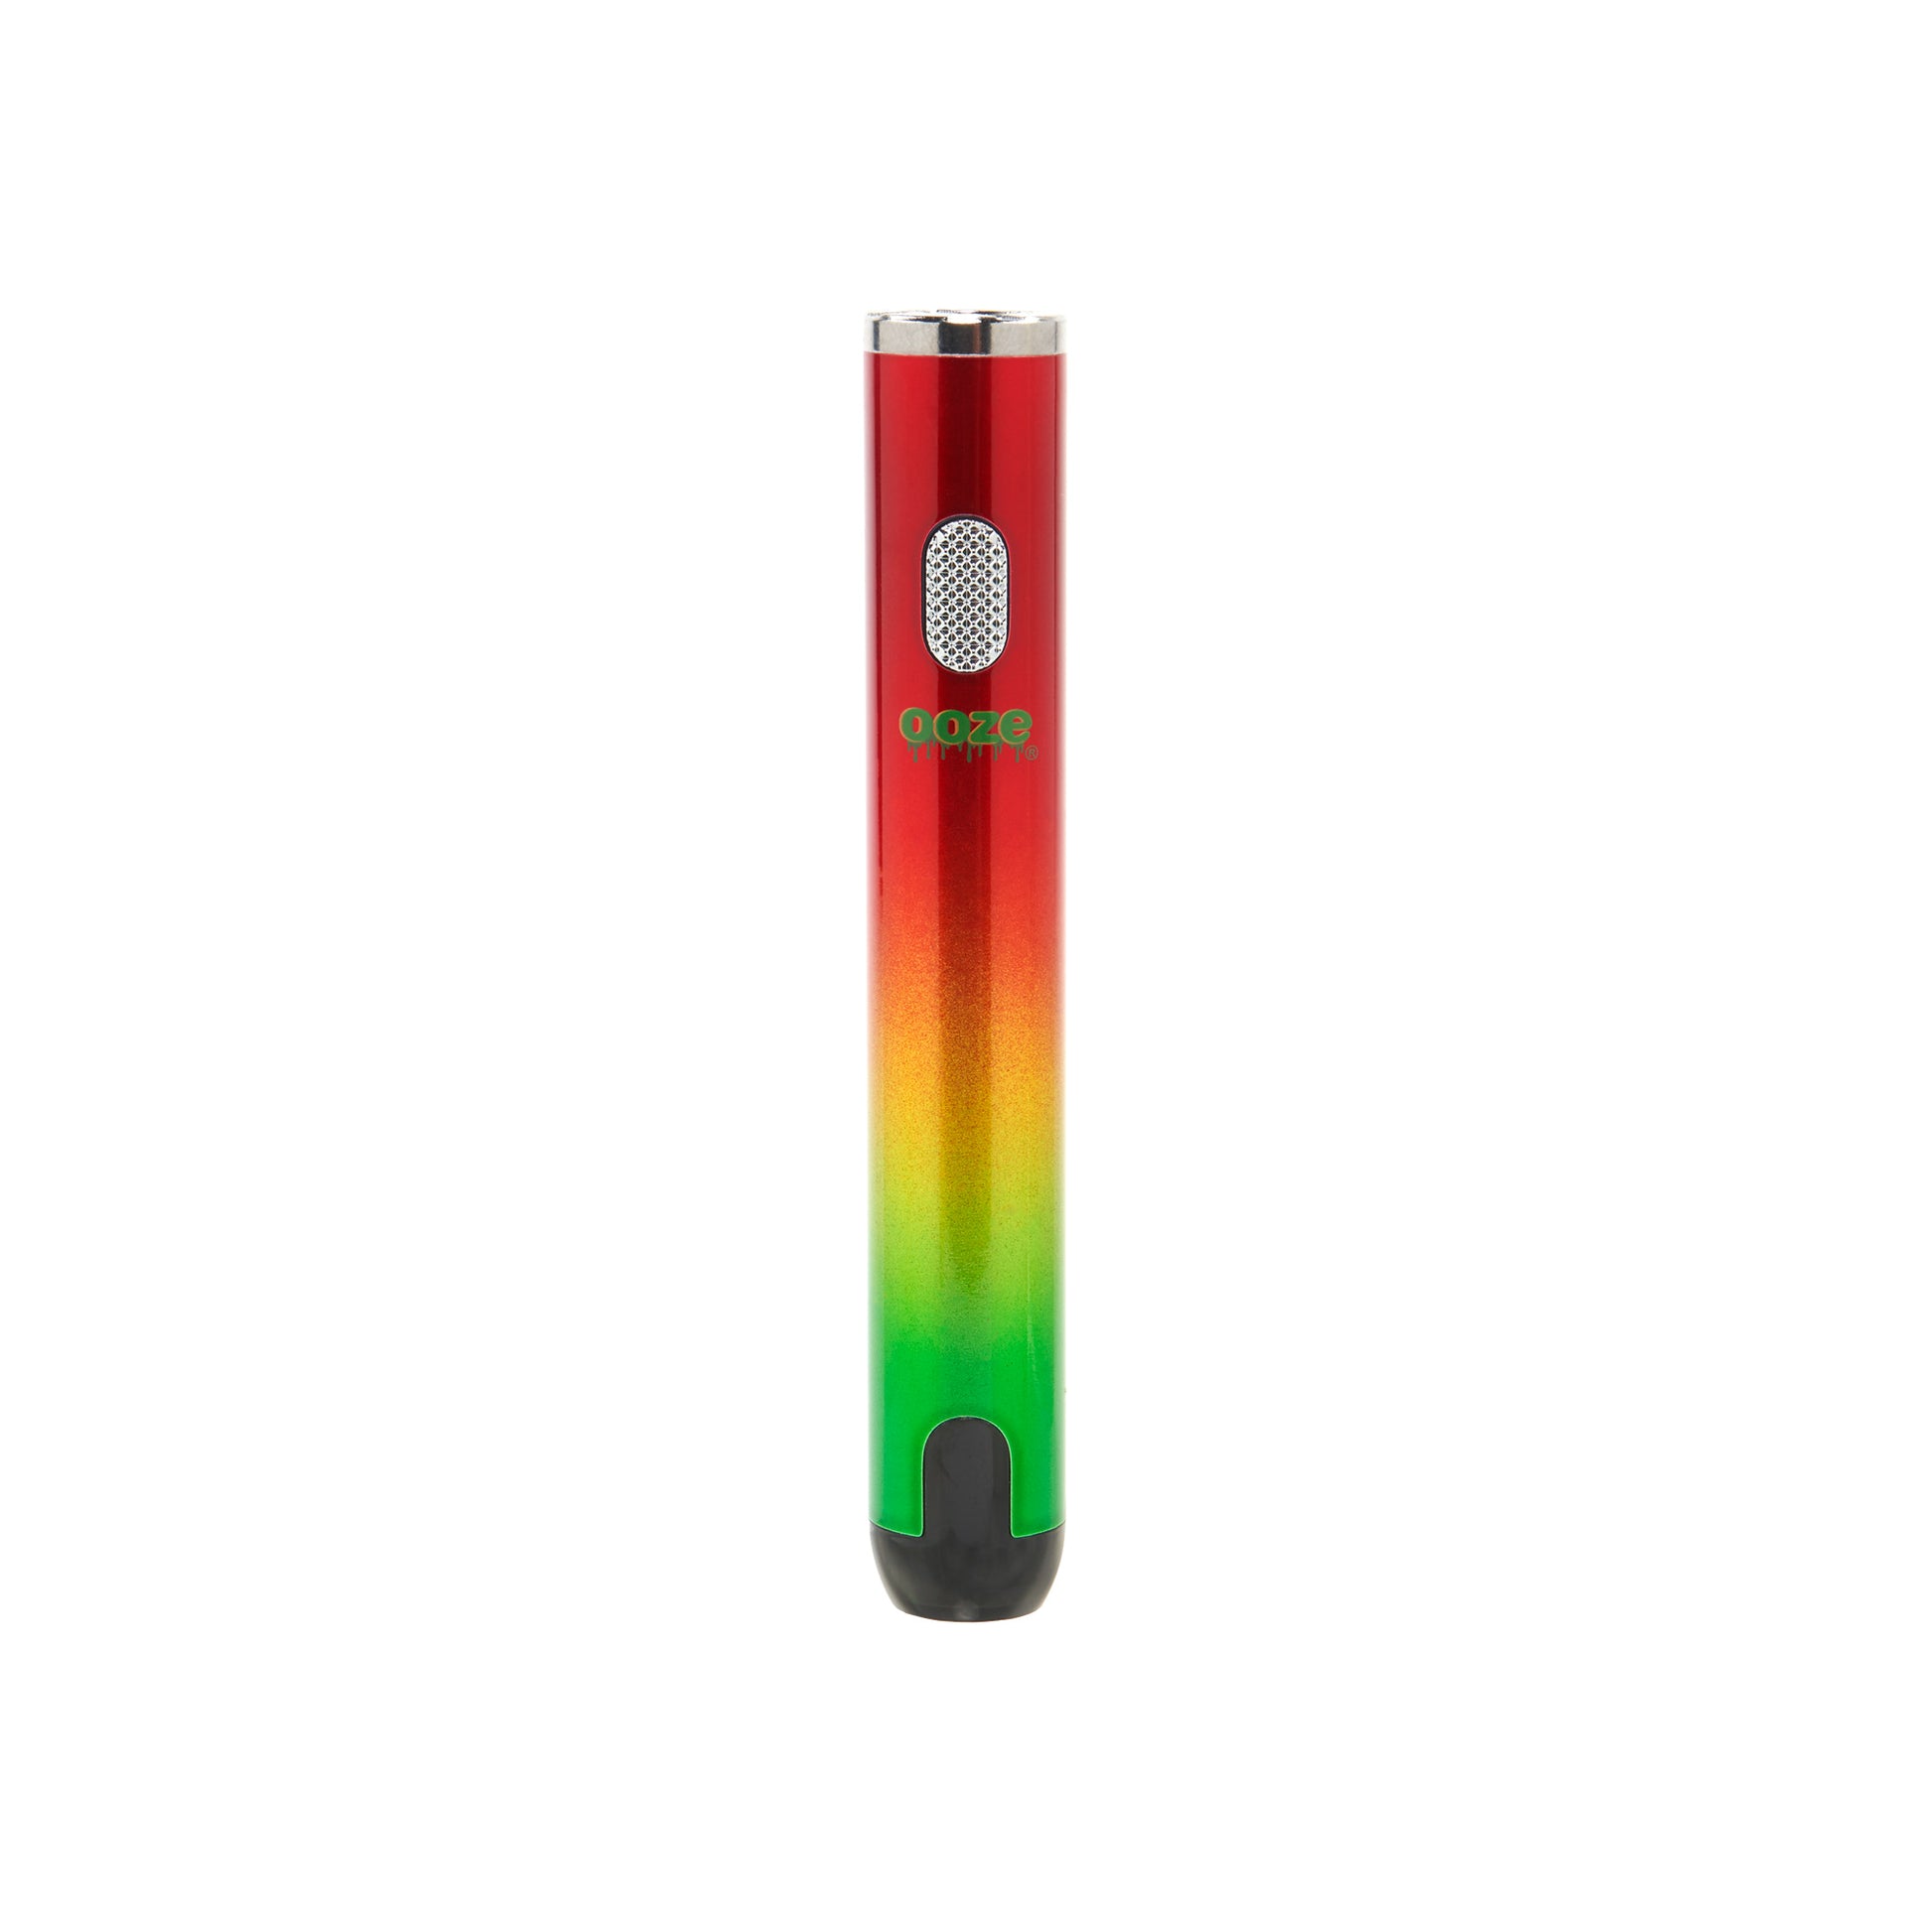 The rasta Ooze Smart Battery is upright and turned off without the charger